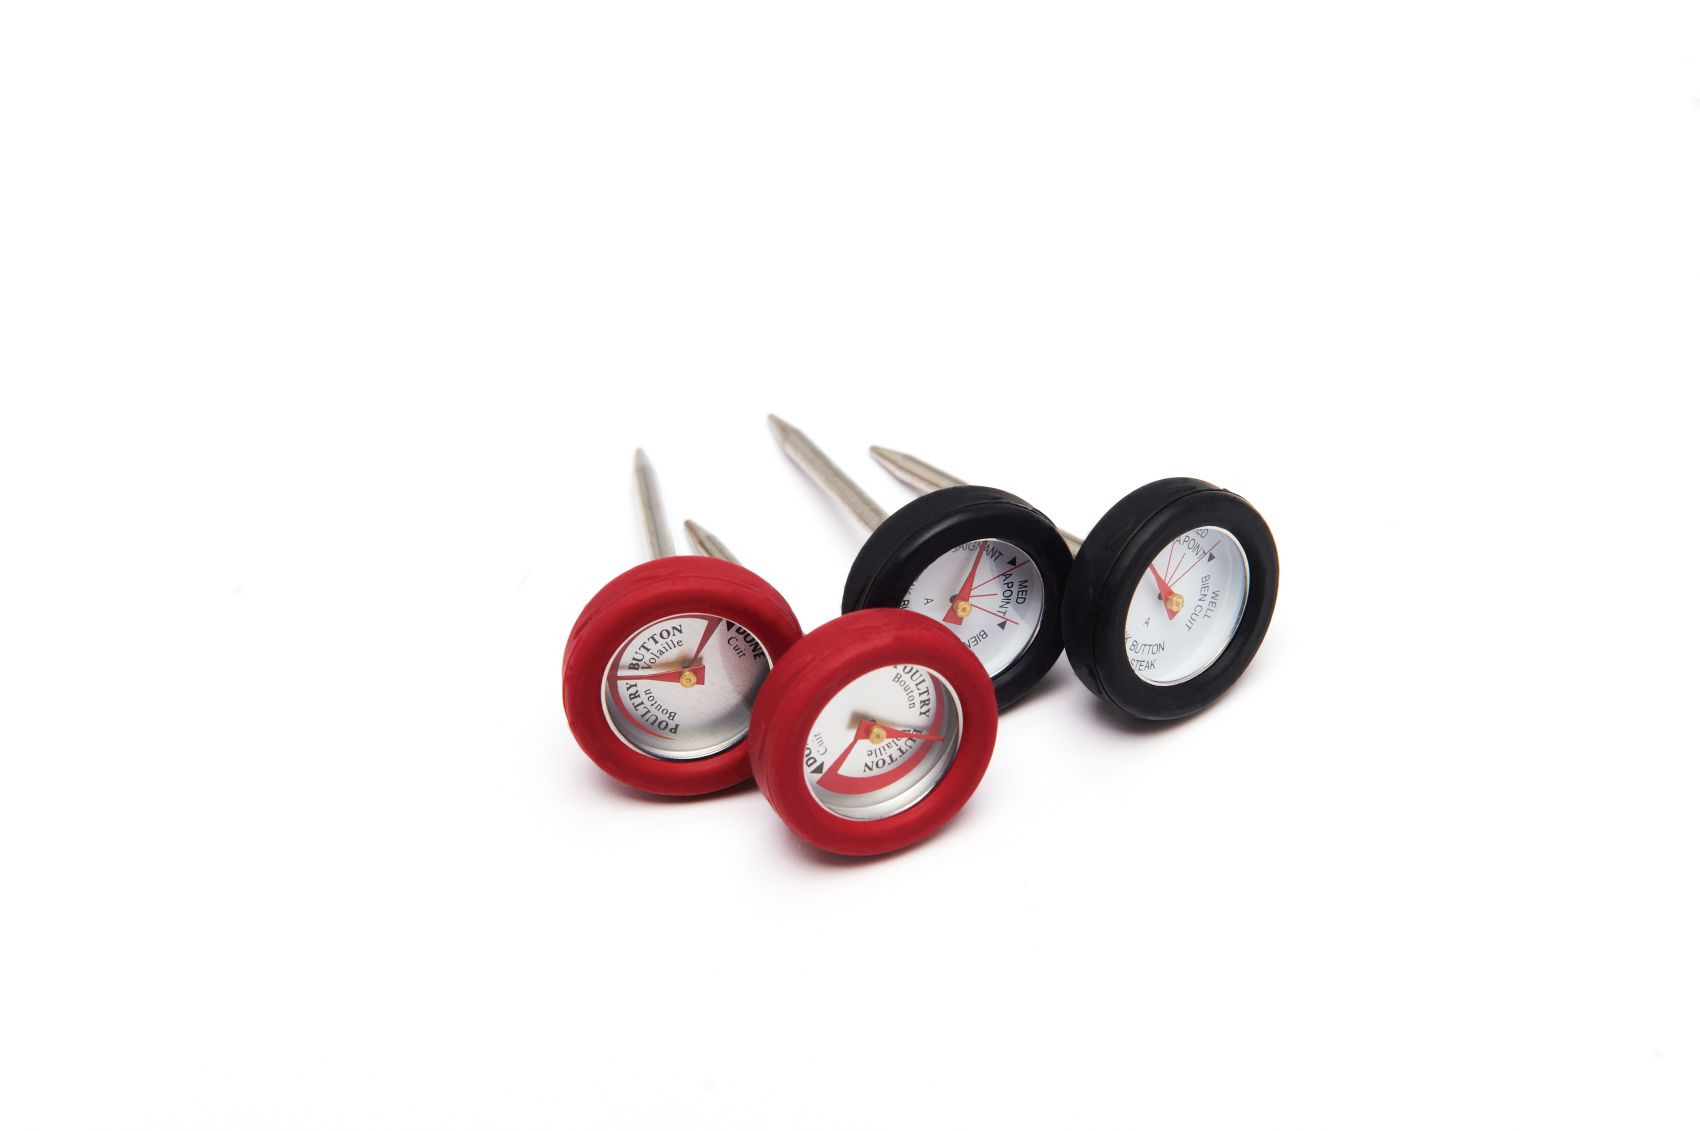 Broil King set of mini thermometers 61138